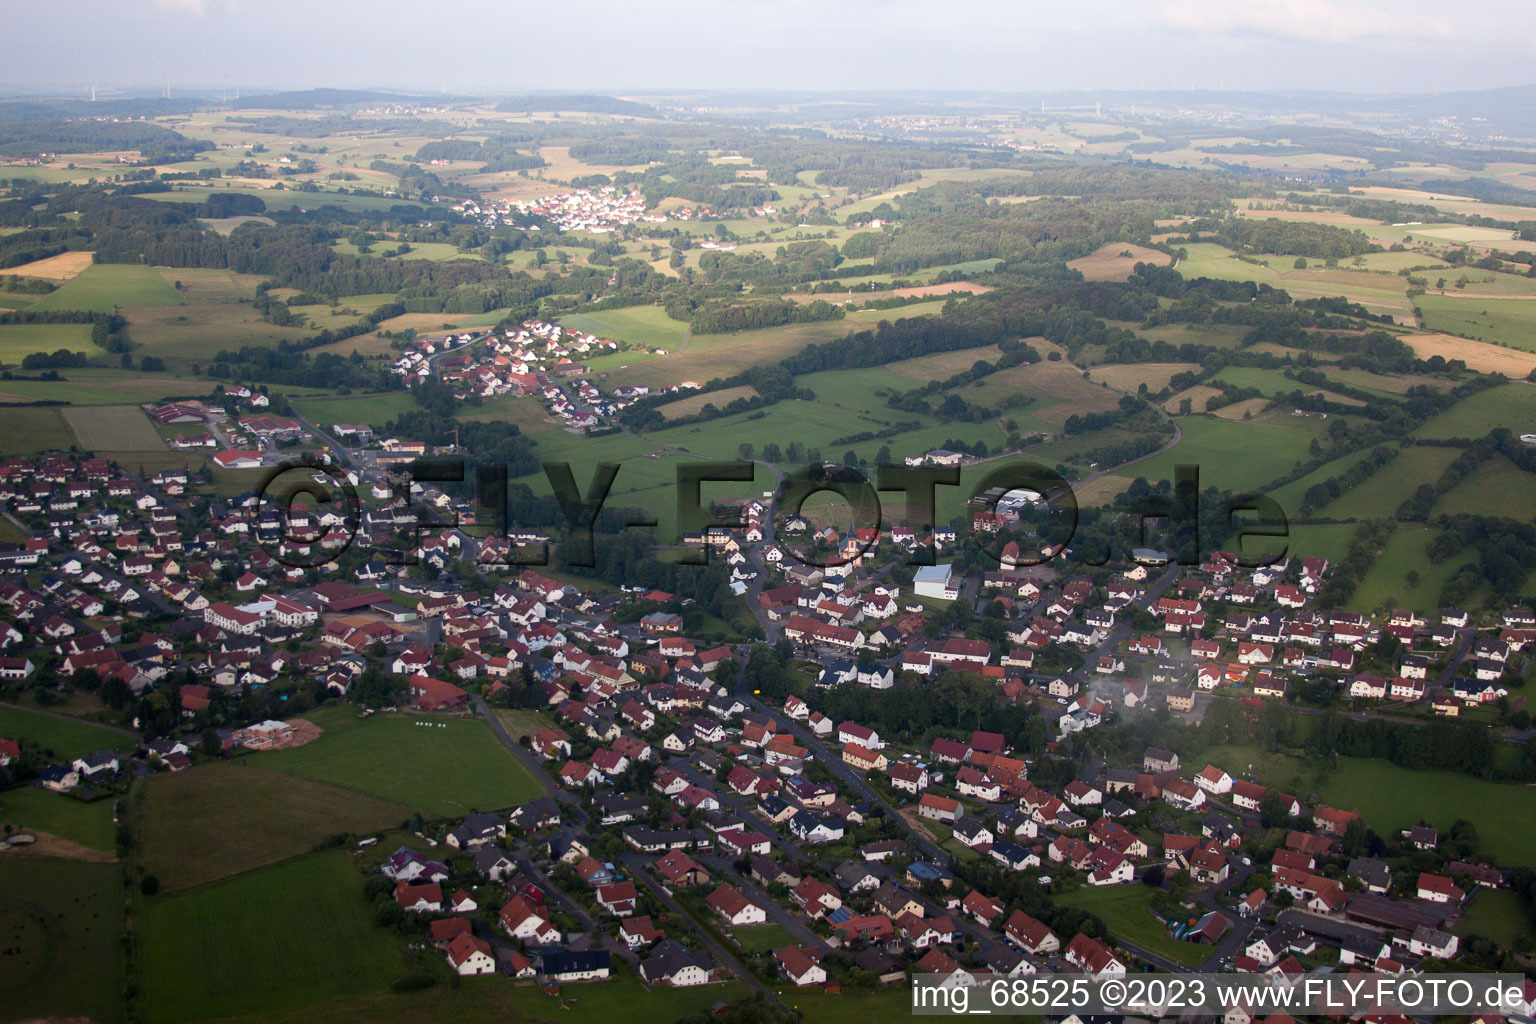 Hosenfeld in the state Hesse, Germany